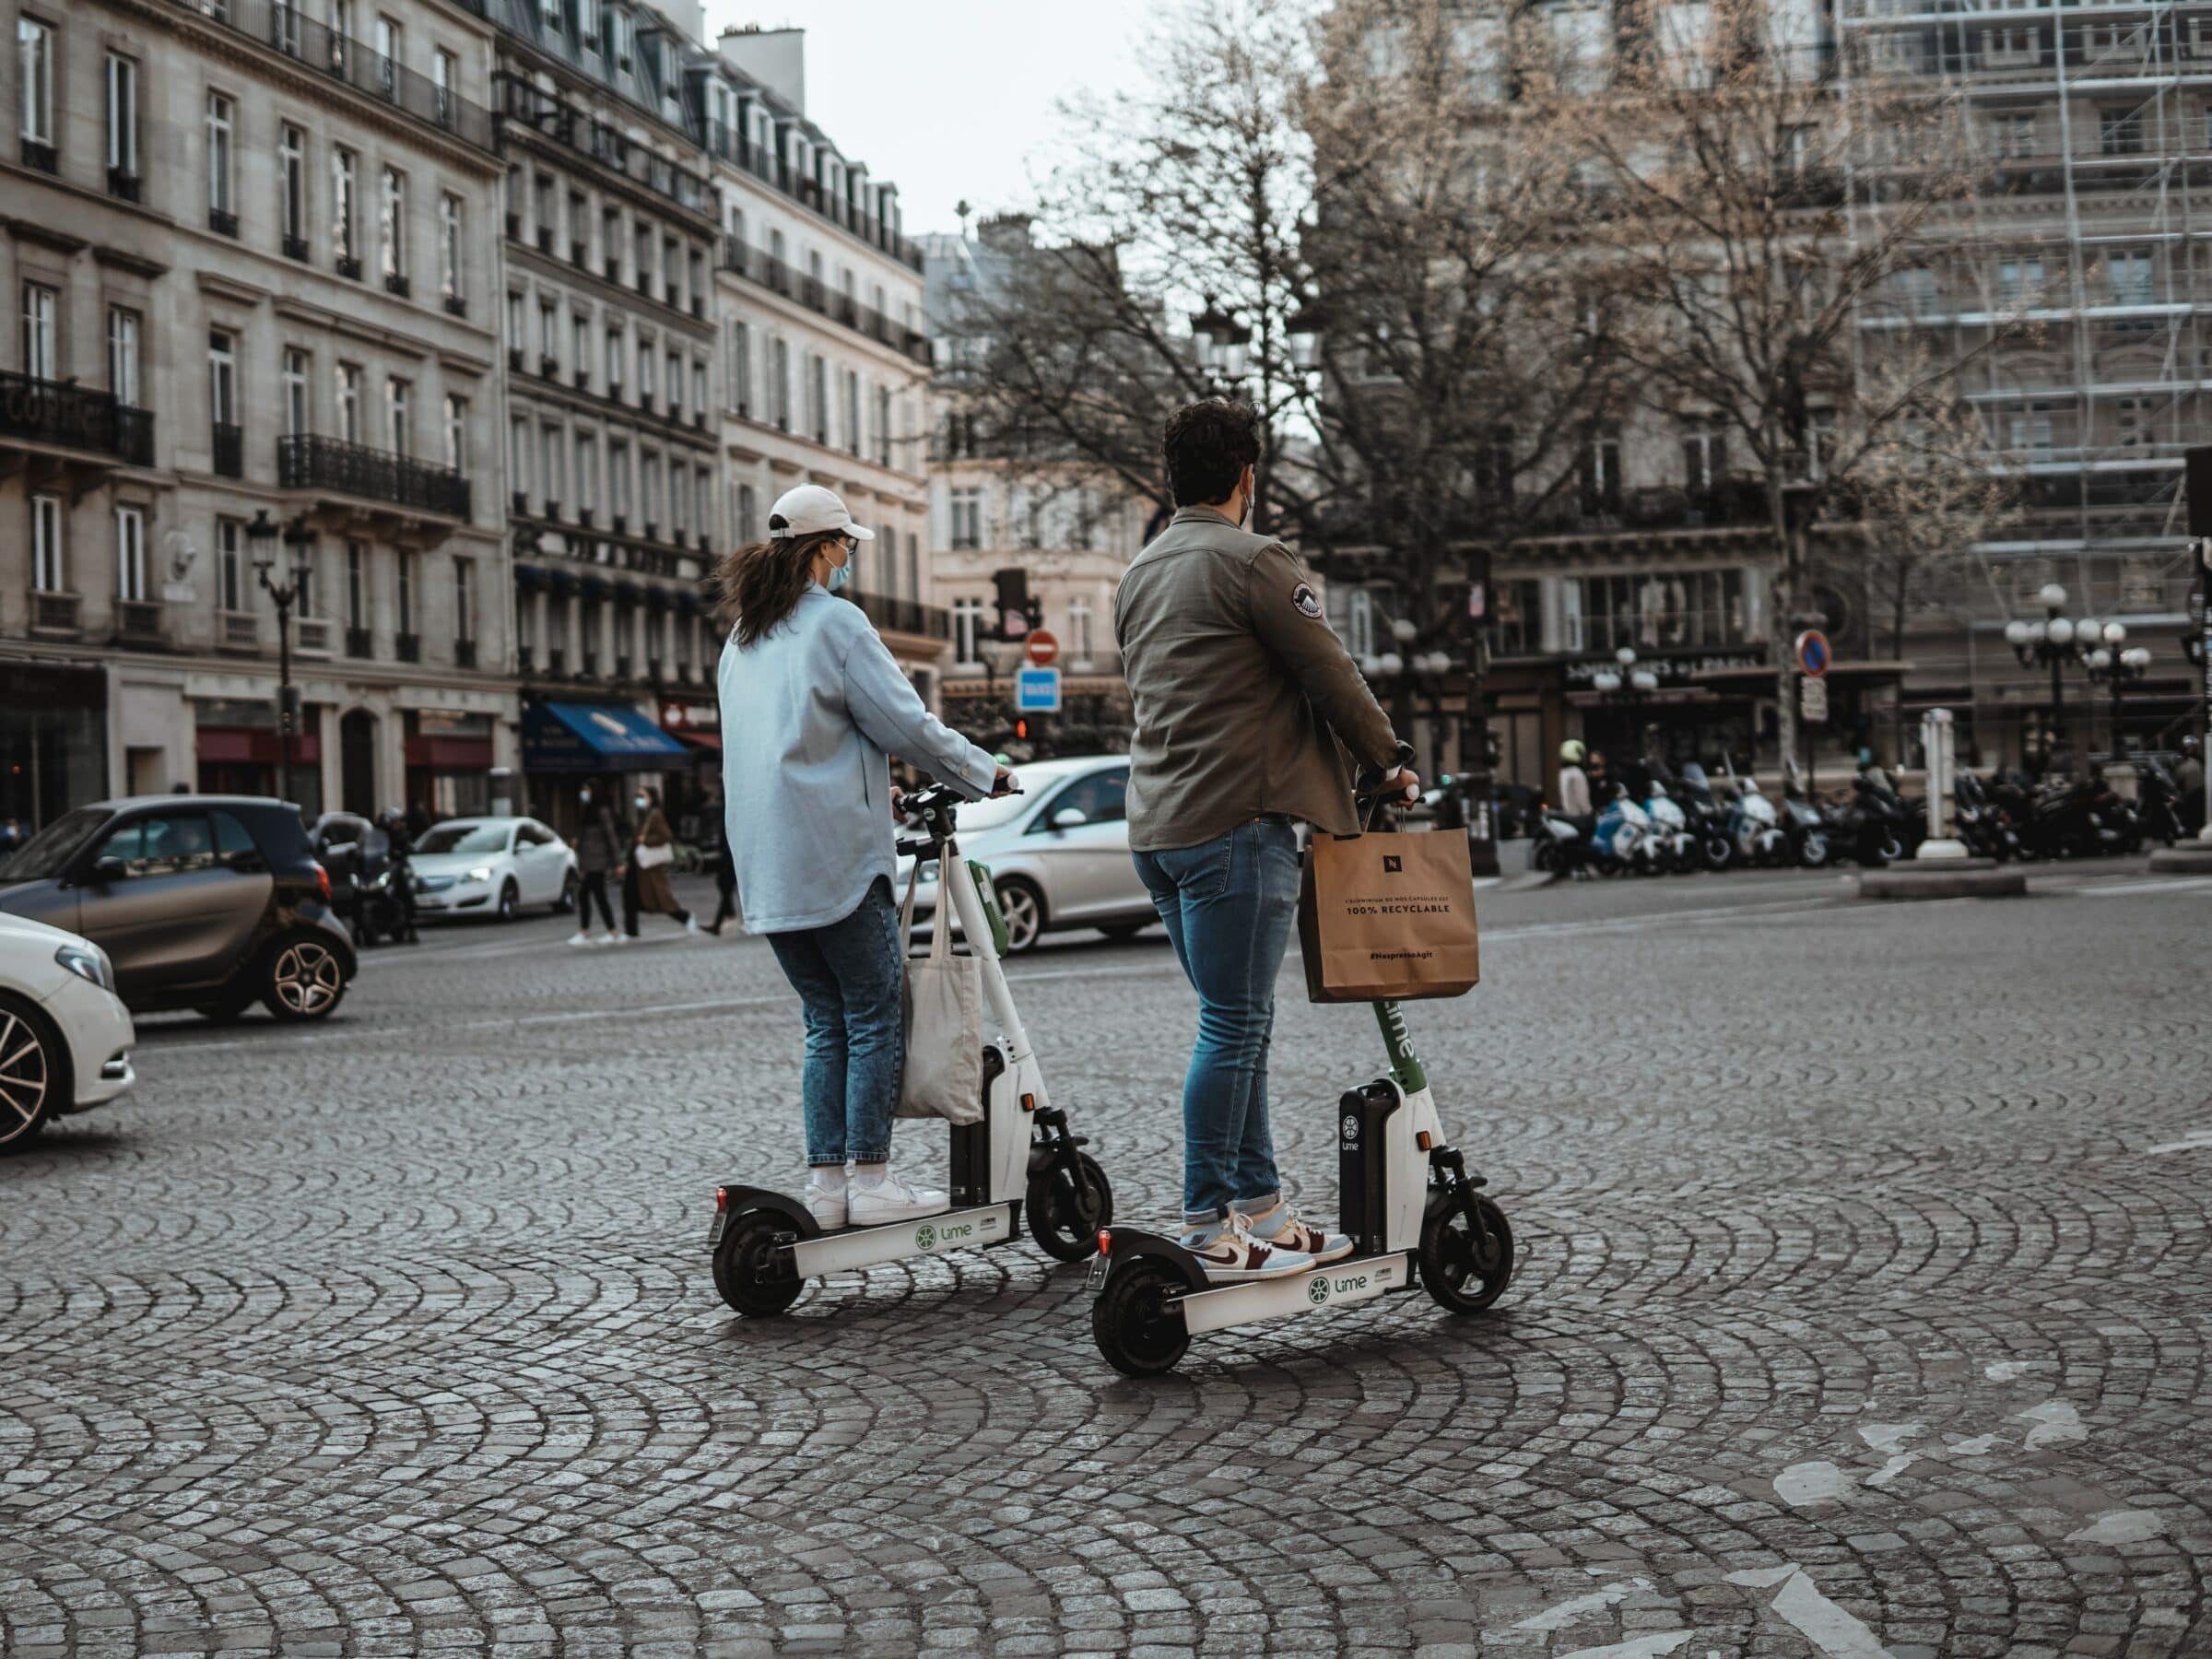 micromobility - people using electric scooters